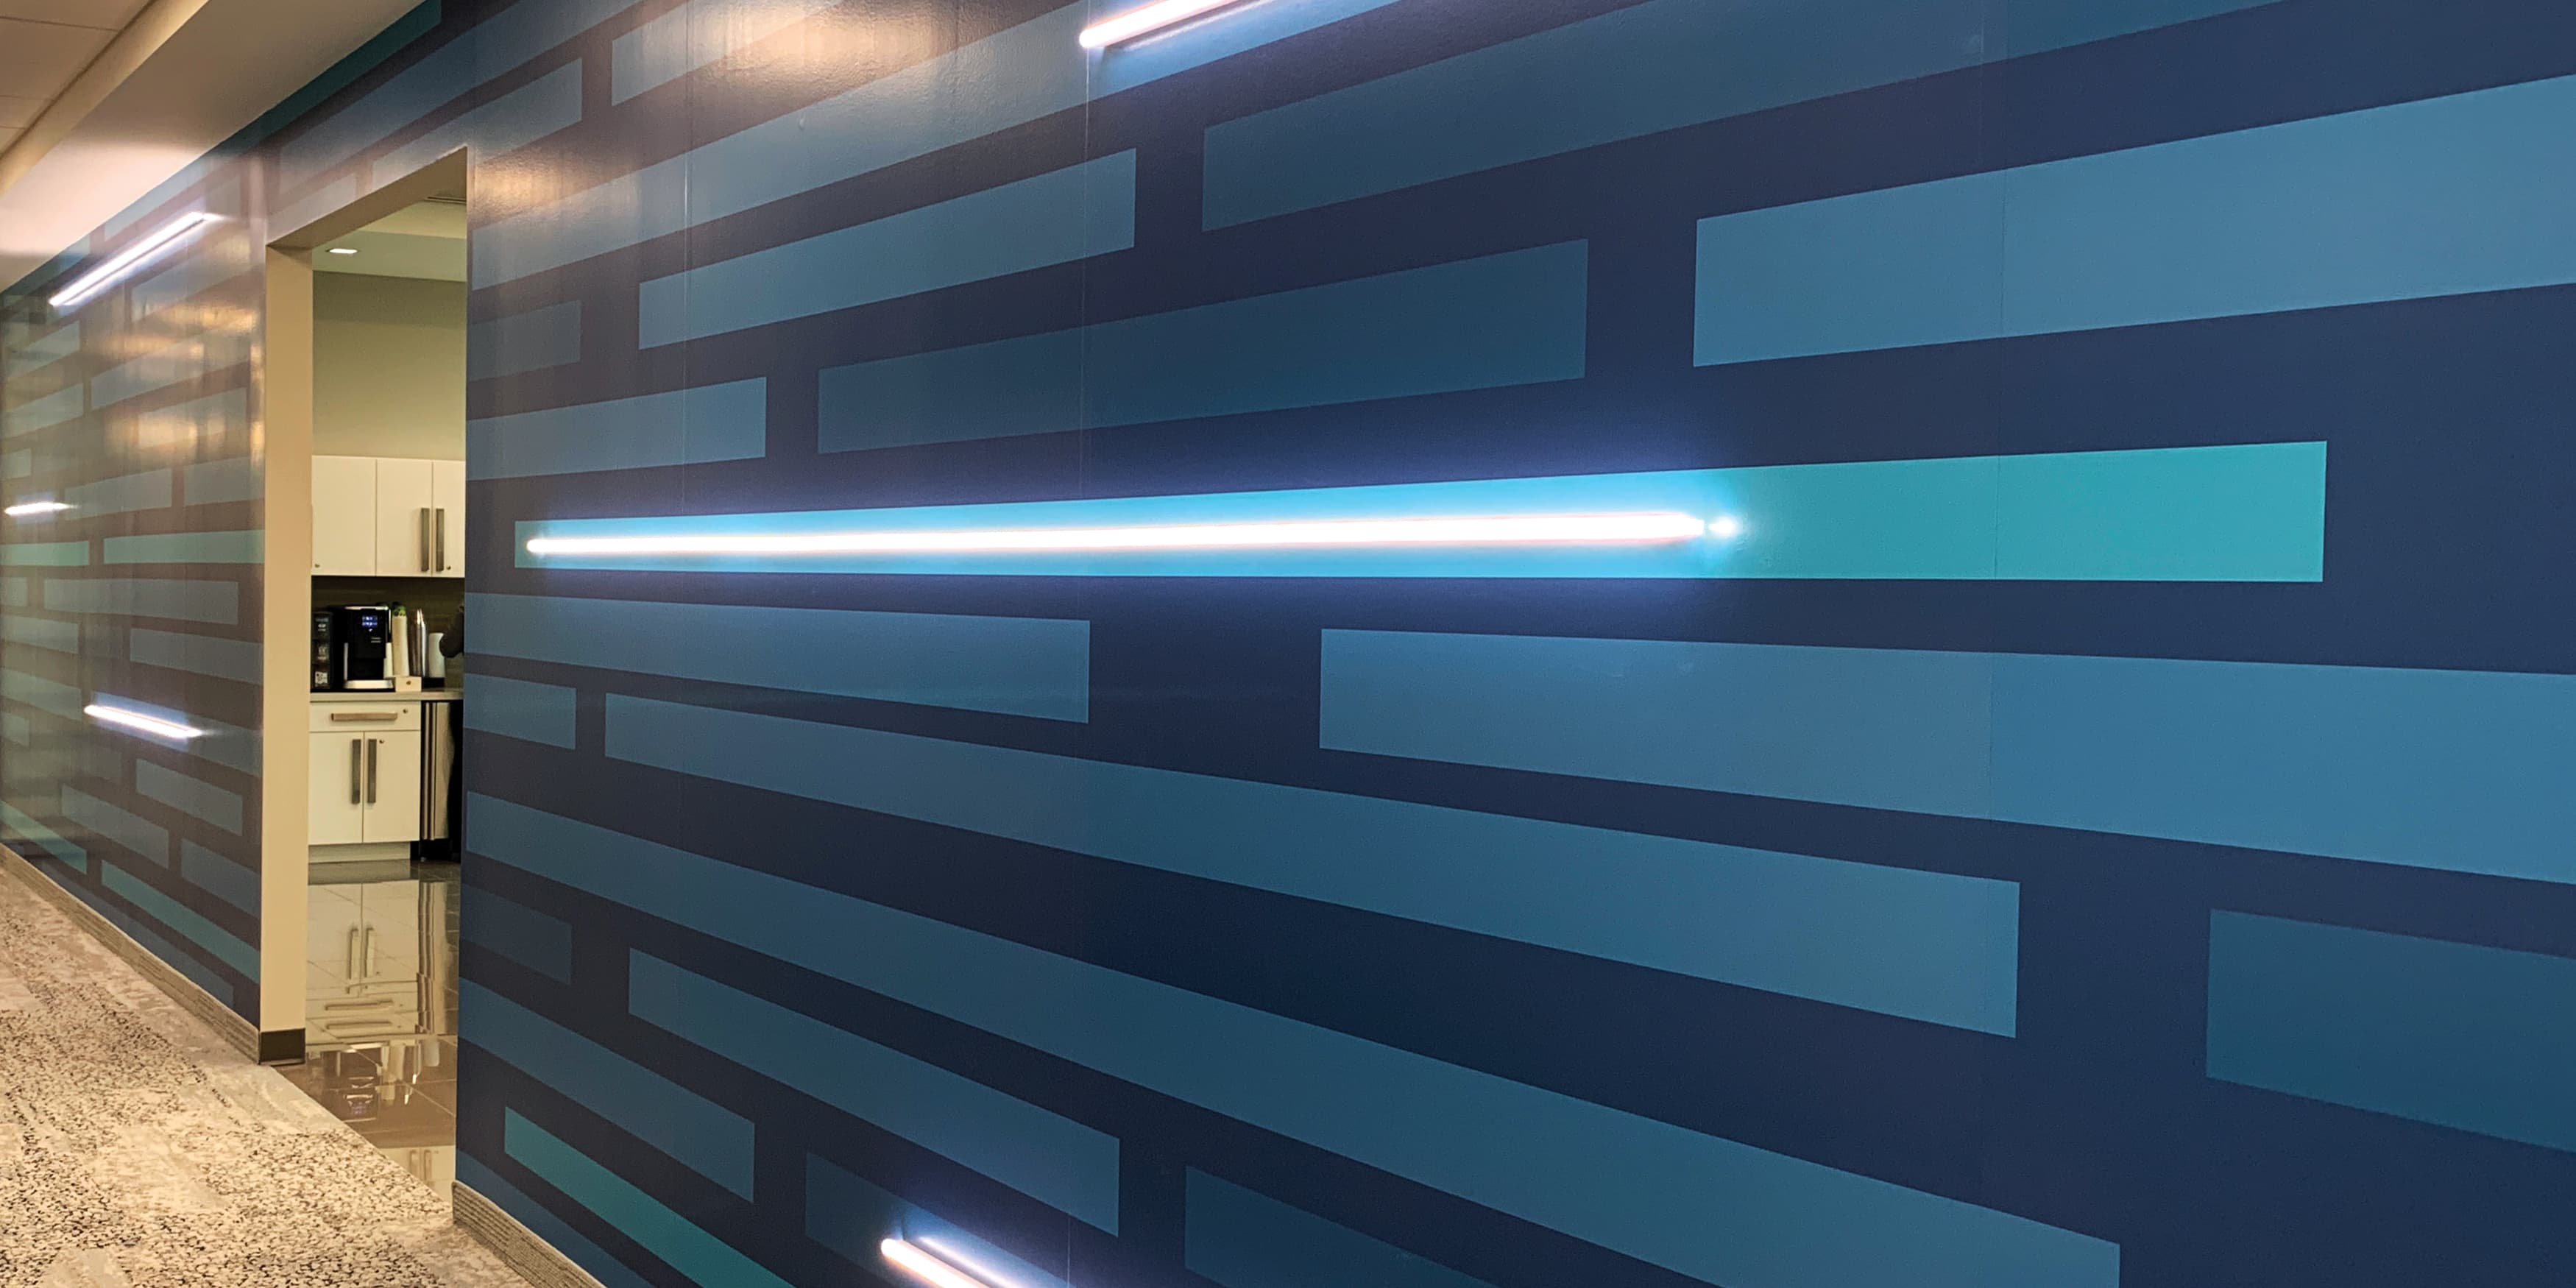 Speciality art mural by RSM Design for JMFE Headquarters consisting of blue dashed painted lines mixed with blue neon signage for office workplace design.